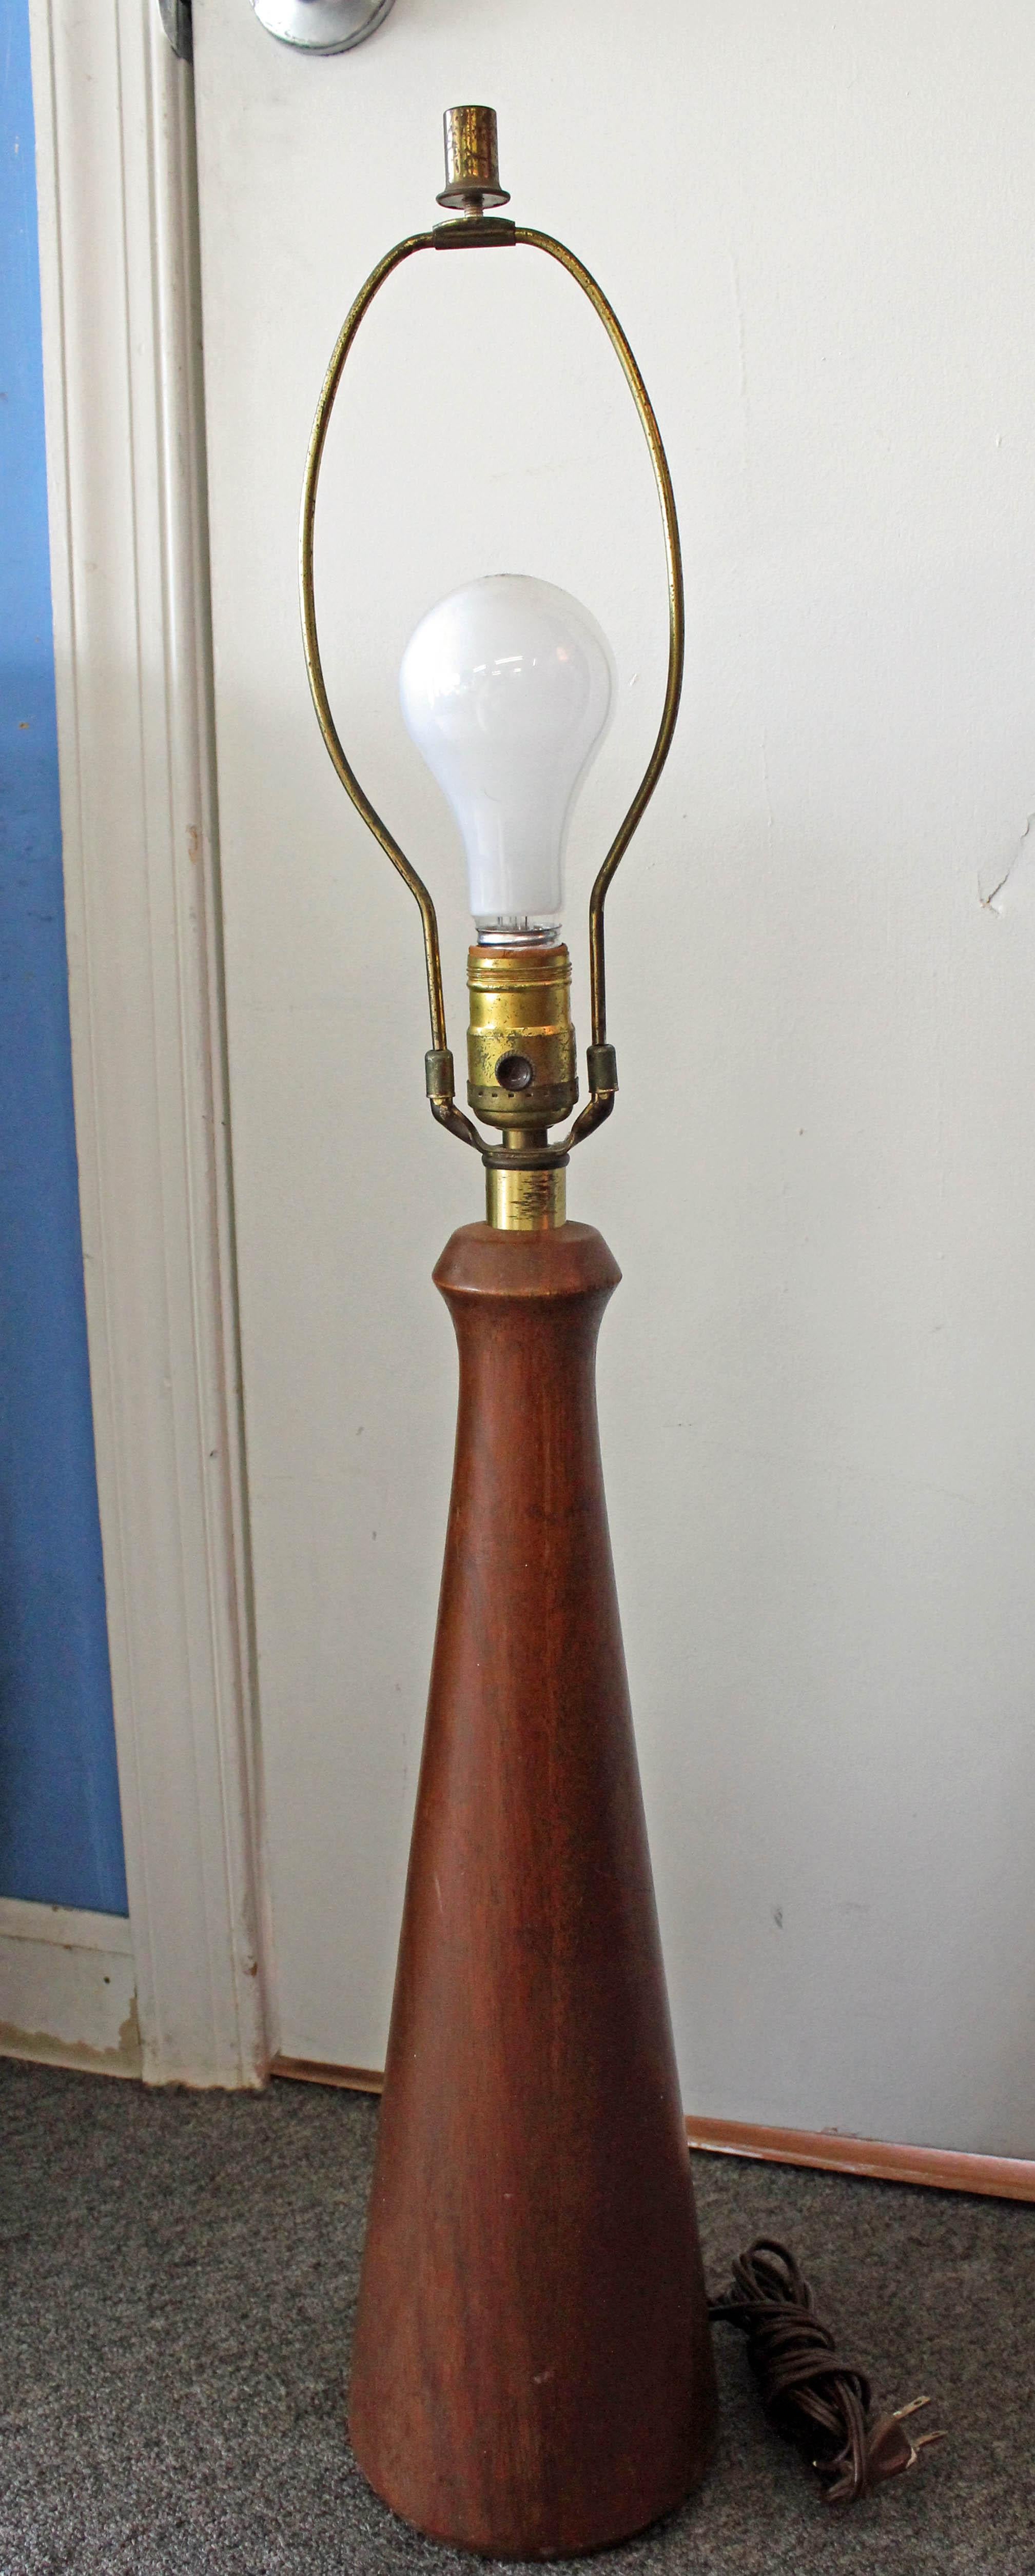 Offered is a cone-shaped teak table lamp. It is in good, working condition. It is not signed. A great piece to add to any room in your home. 

Dimensions:
5